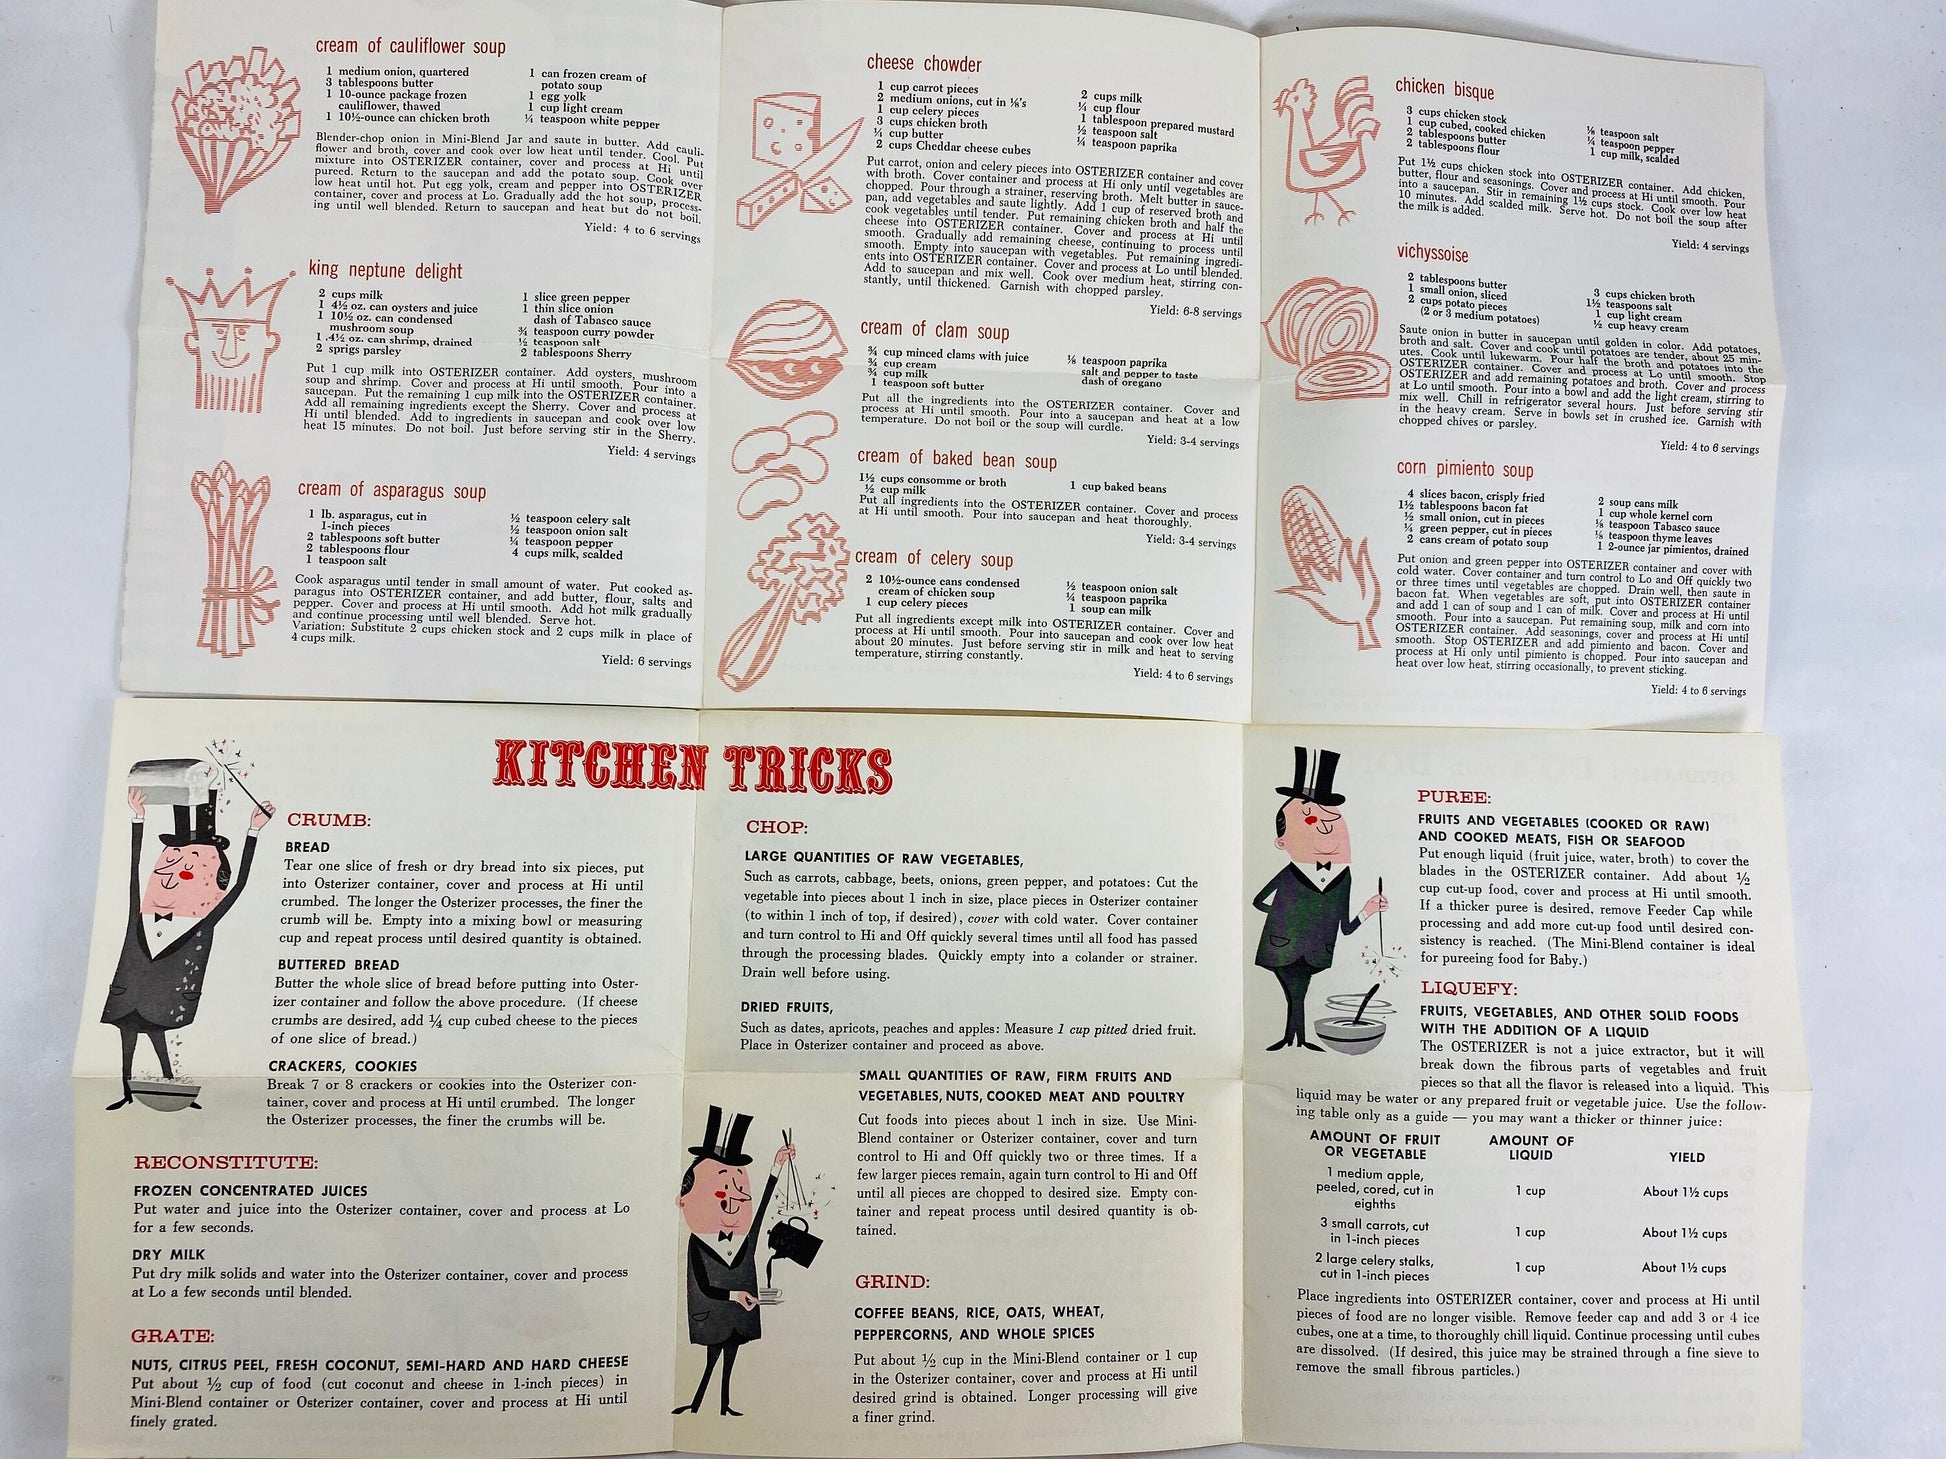 1967 Oster ORIGINAL Vintage booklets and recipes. Retro blender kitchen tricks, do's & don'ts spin cookery. 1960s lot